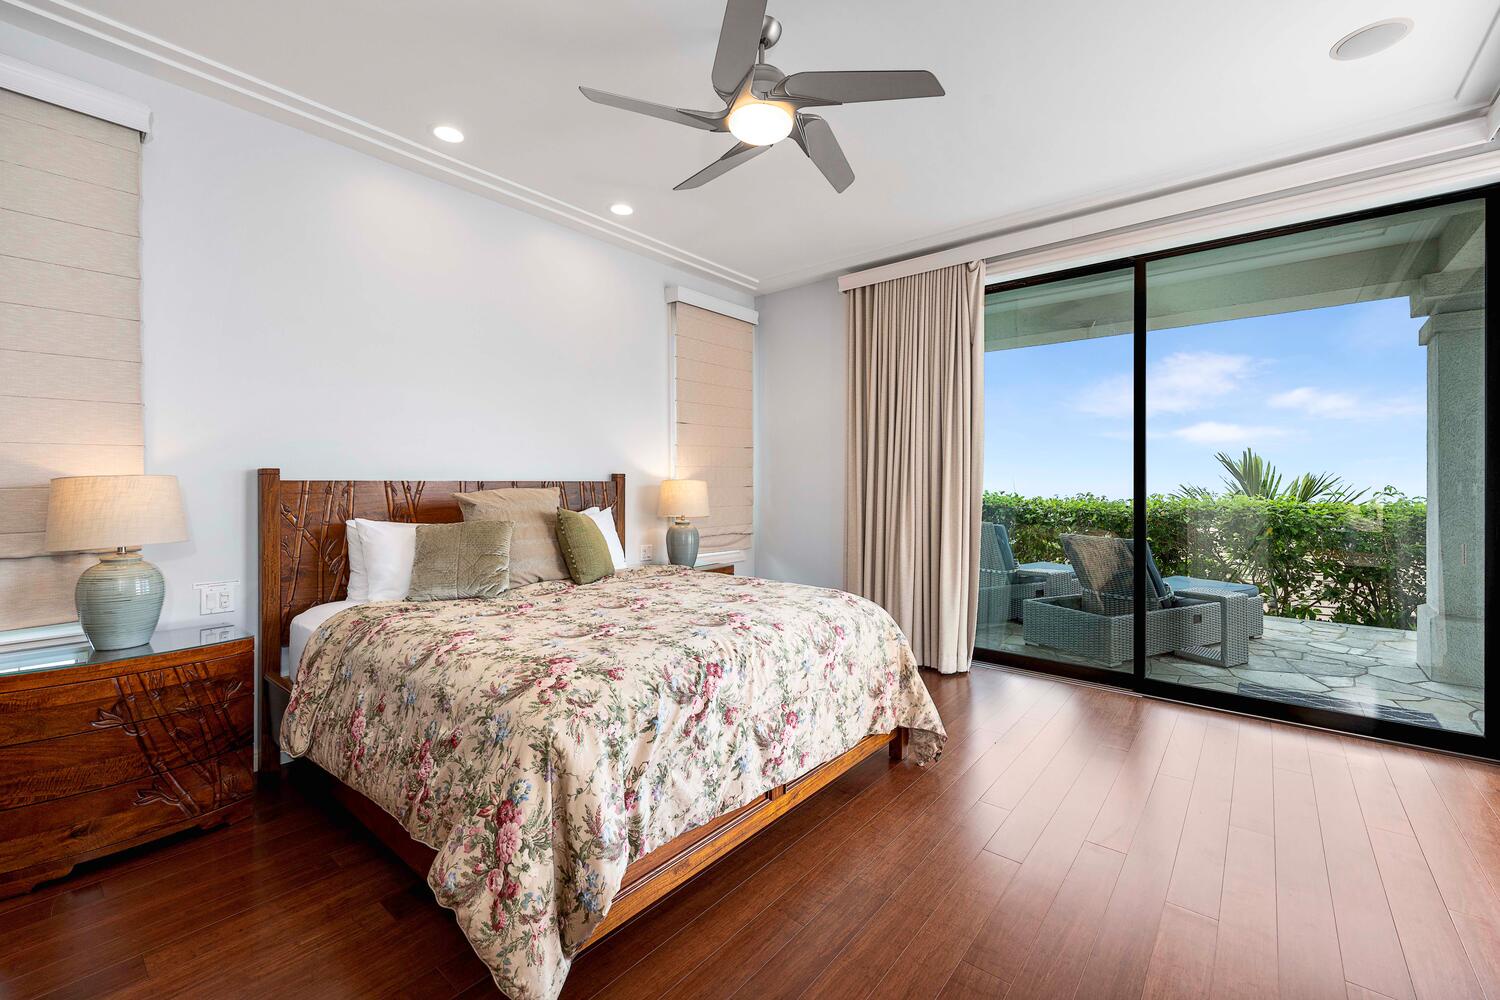 Kailua Kona Vacation Rentals, Blue Hawaii - The primary bedroom with King sized bed, attached ensuite, and phenomenal views!